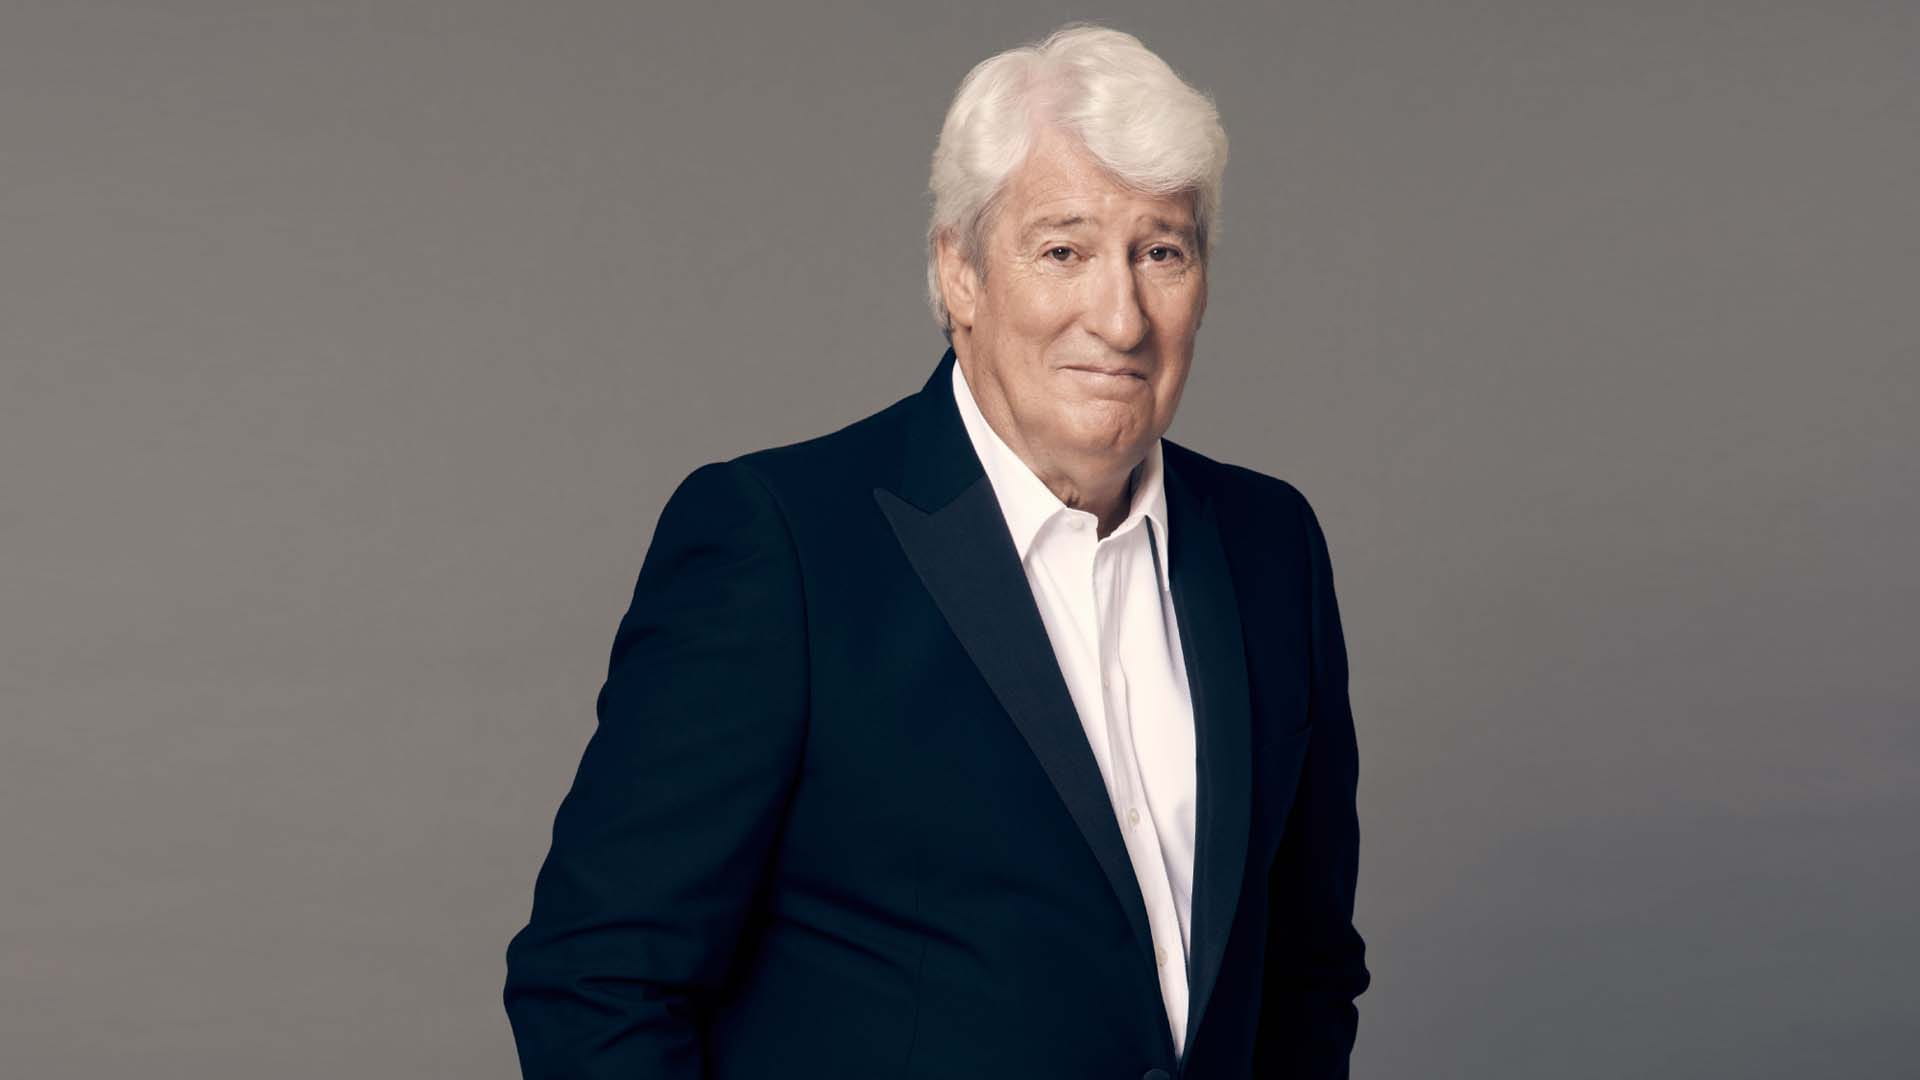 A photo of Jeremy Paxman in front of a plain background